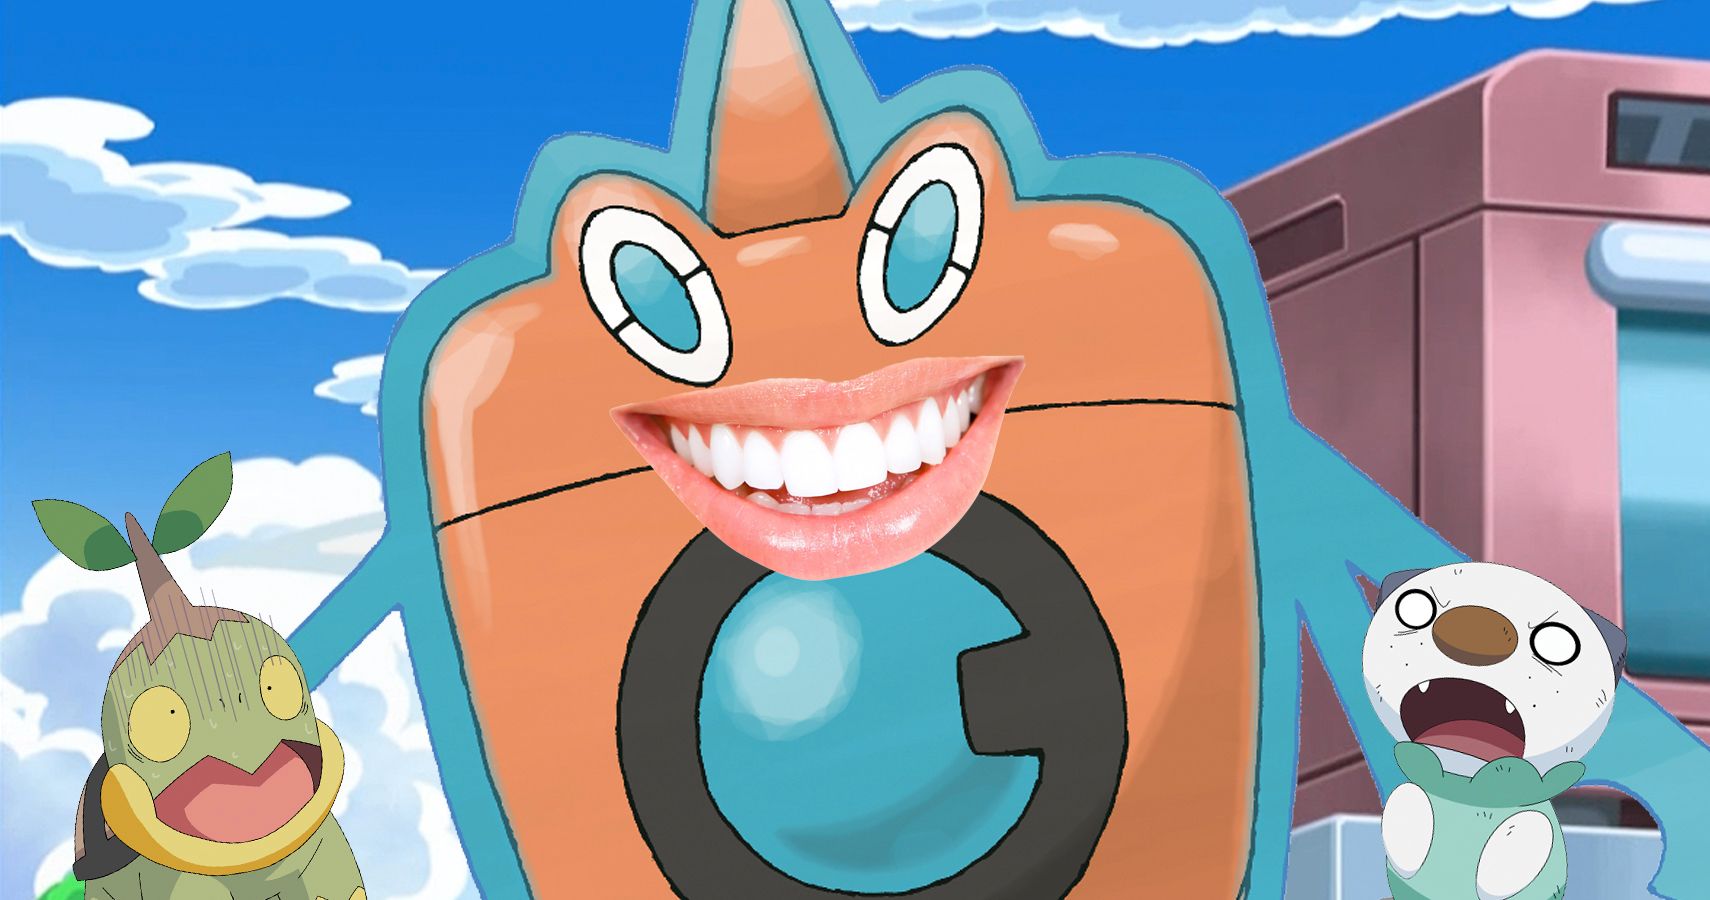 Pokémon Detail Rotom Has Teeth (And We Can’t Unsee It)